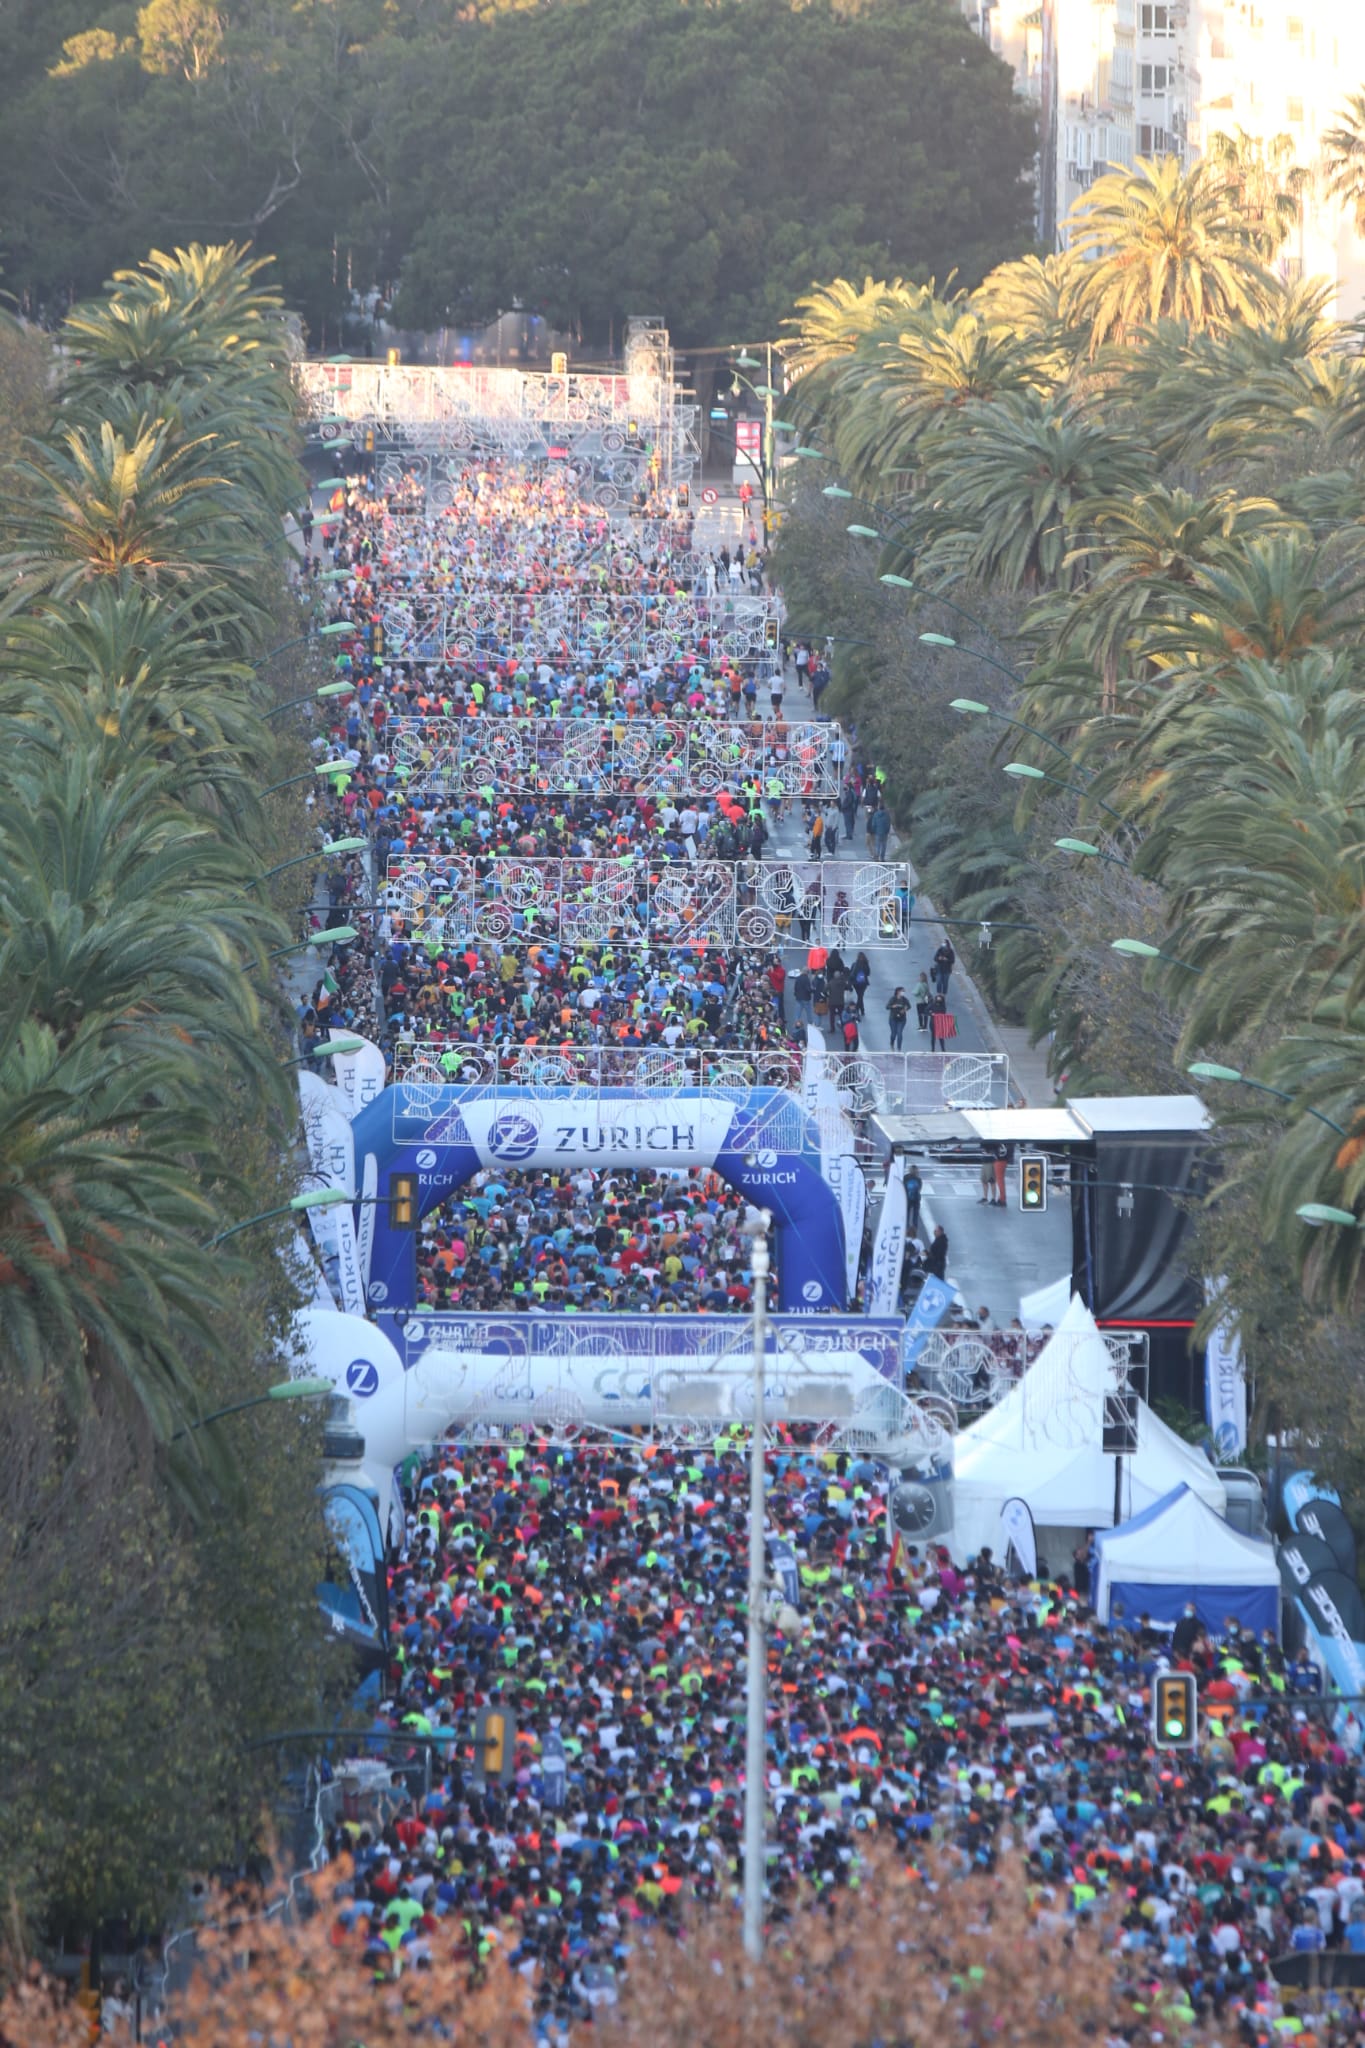 Around 9,000 runners participated in the event that also included a half-marathon, which had 4,700 participants